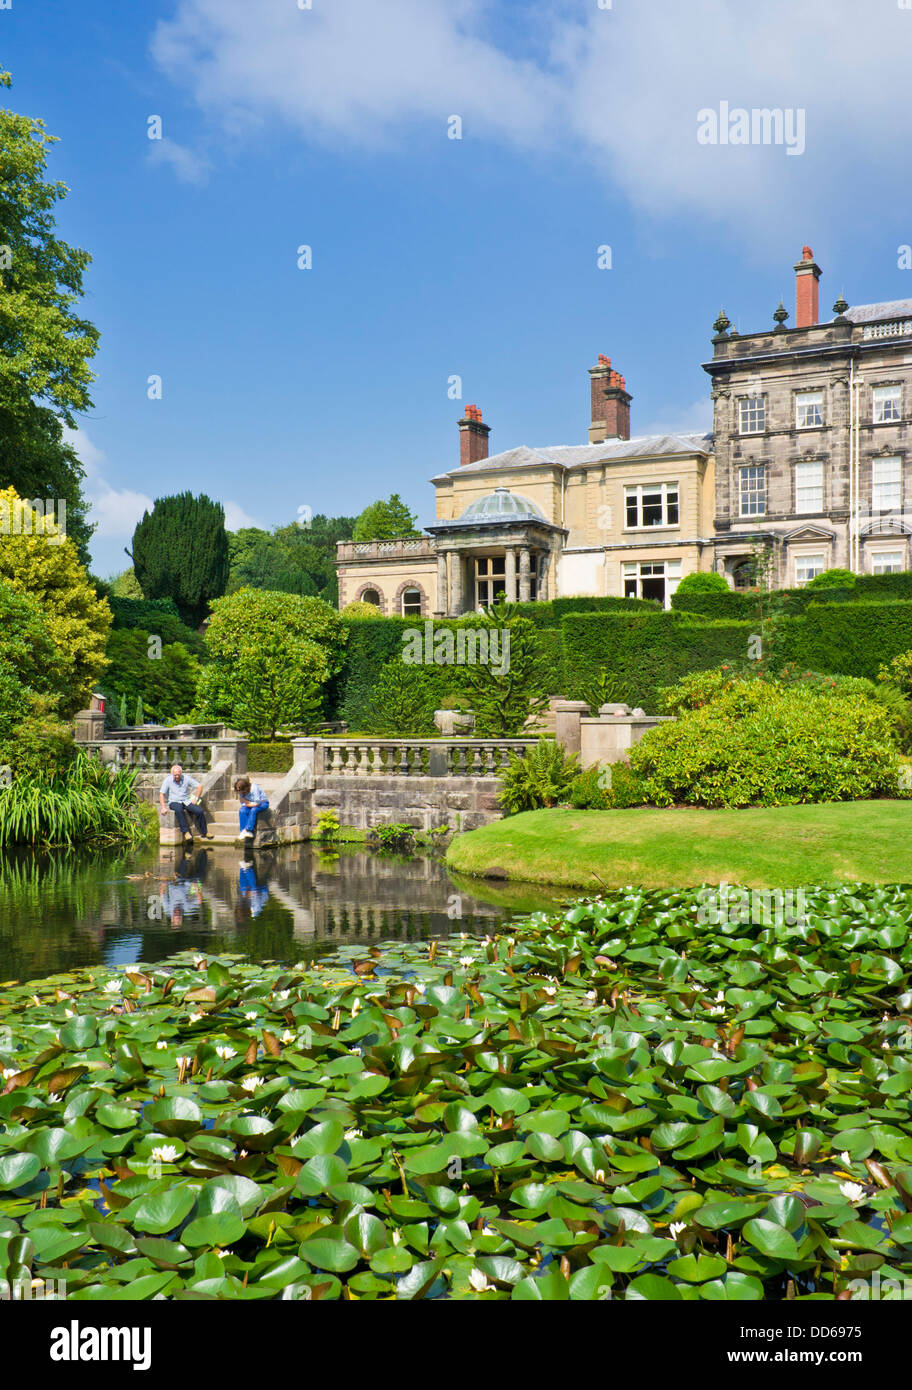 Biddulph grange victorian house and small lake with water lilies in landscaped gardens Staffordshire England UK GB EU Europe Stock Photo